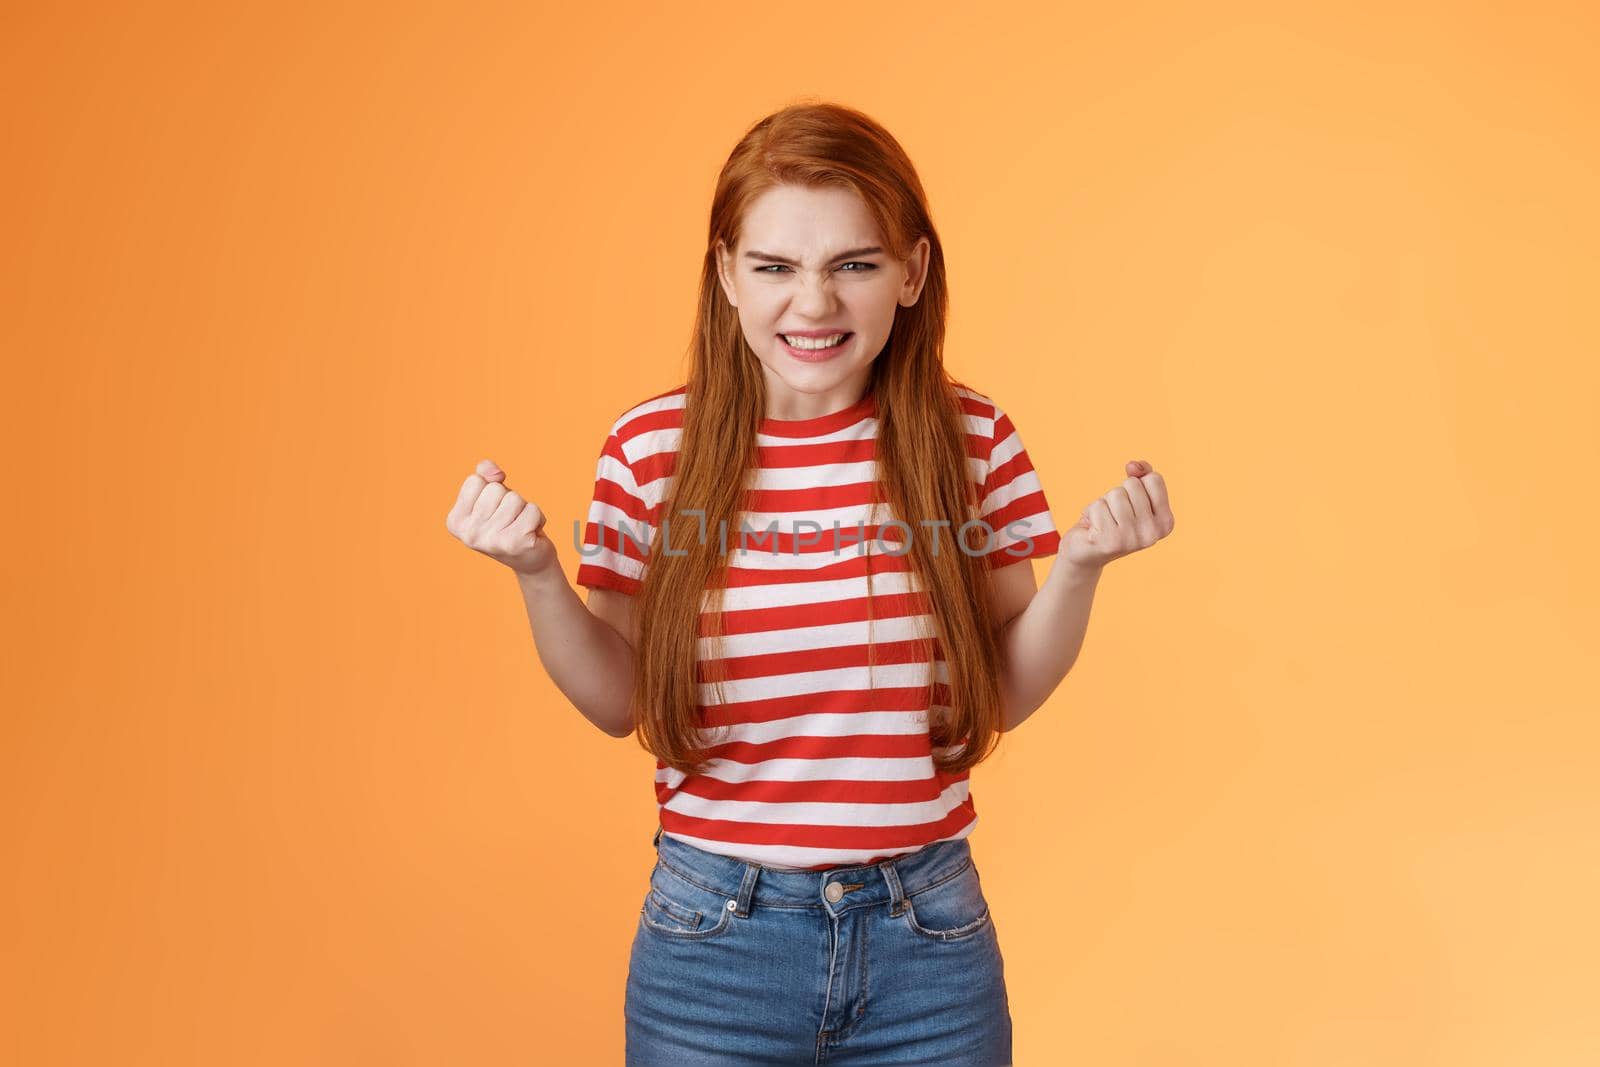 Annoyed pissed redhead female lose competition, clench fists angry grimacing evil hateful face, pressured, hate unfair results, stand orange background bothered, depressed and irritated.